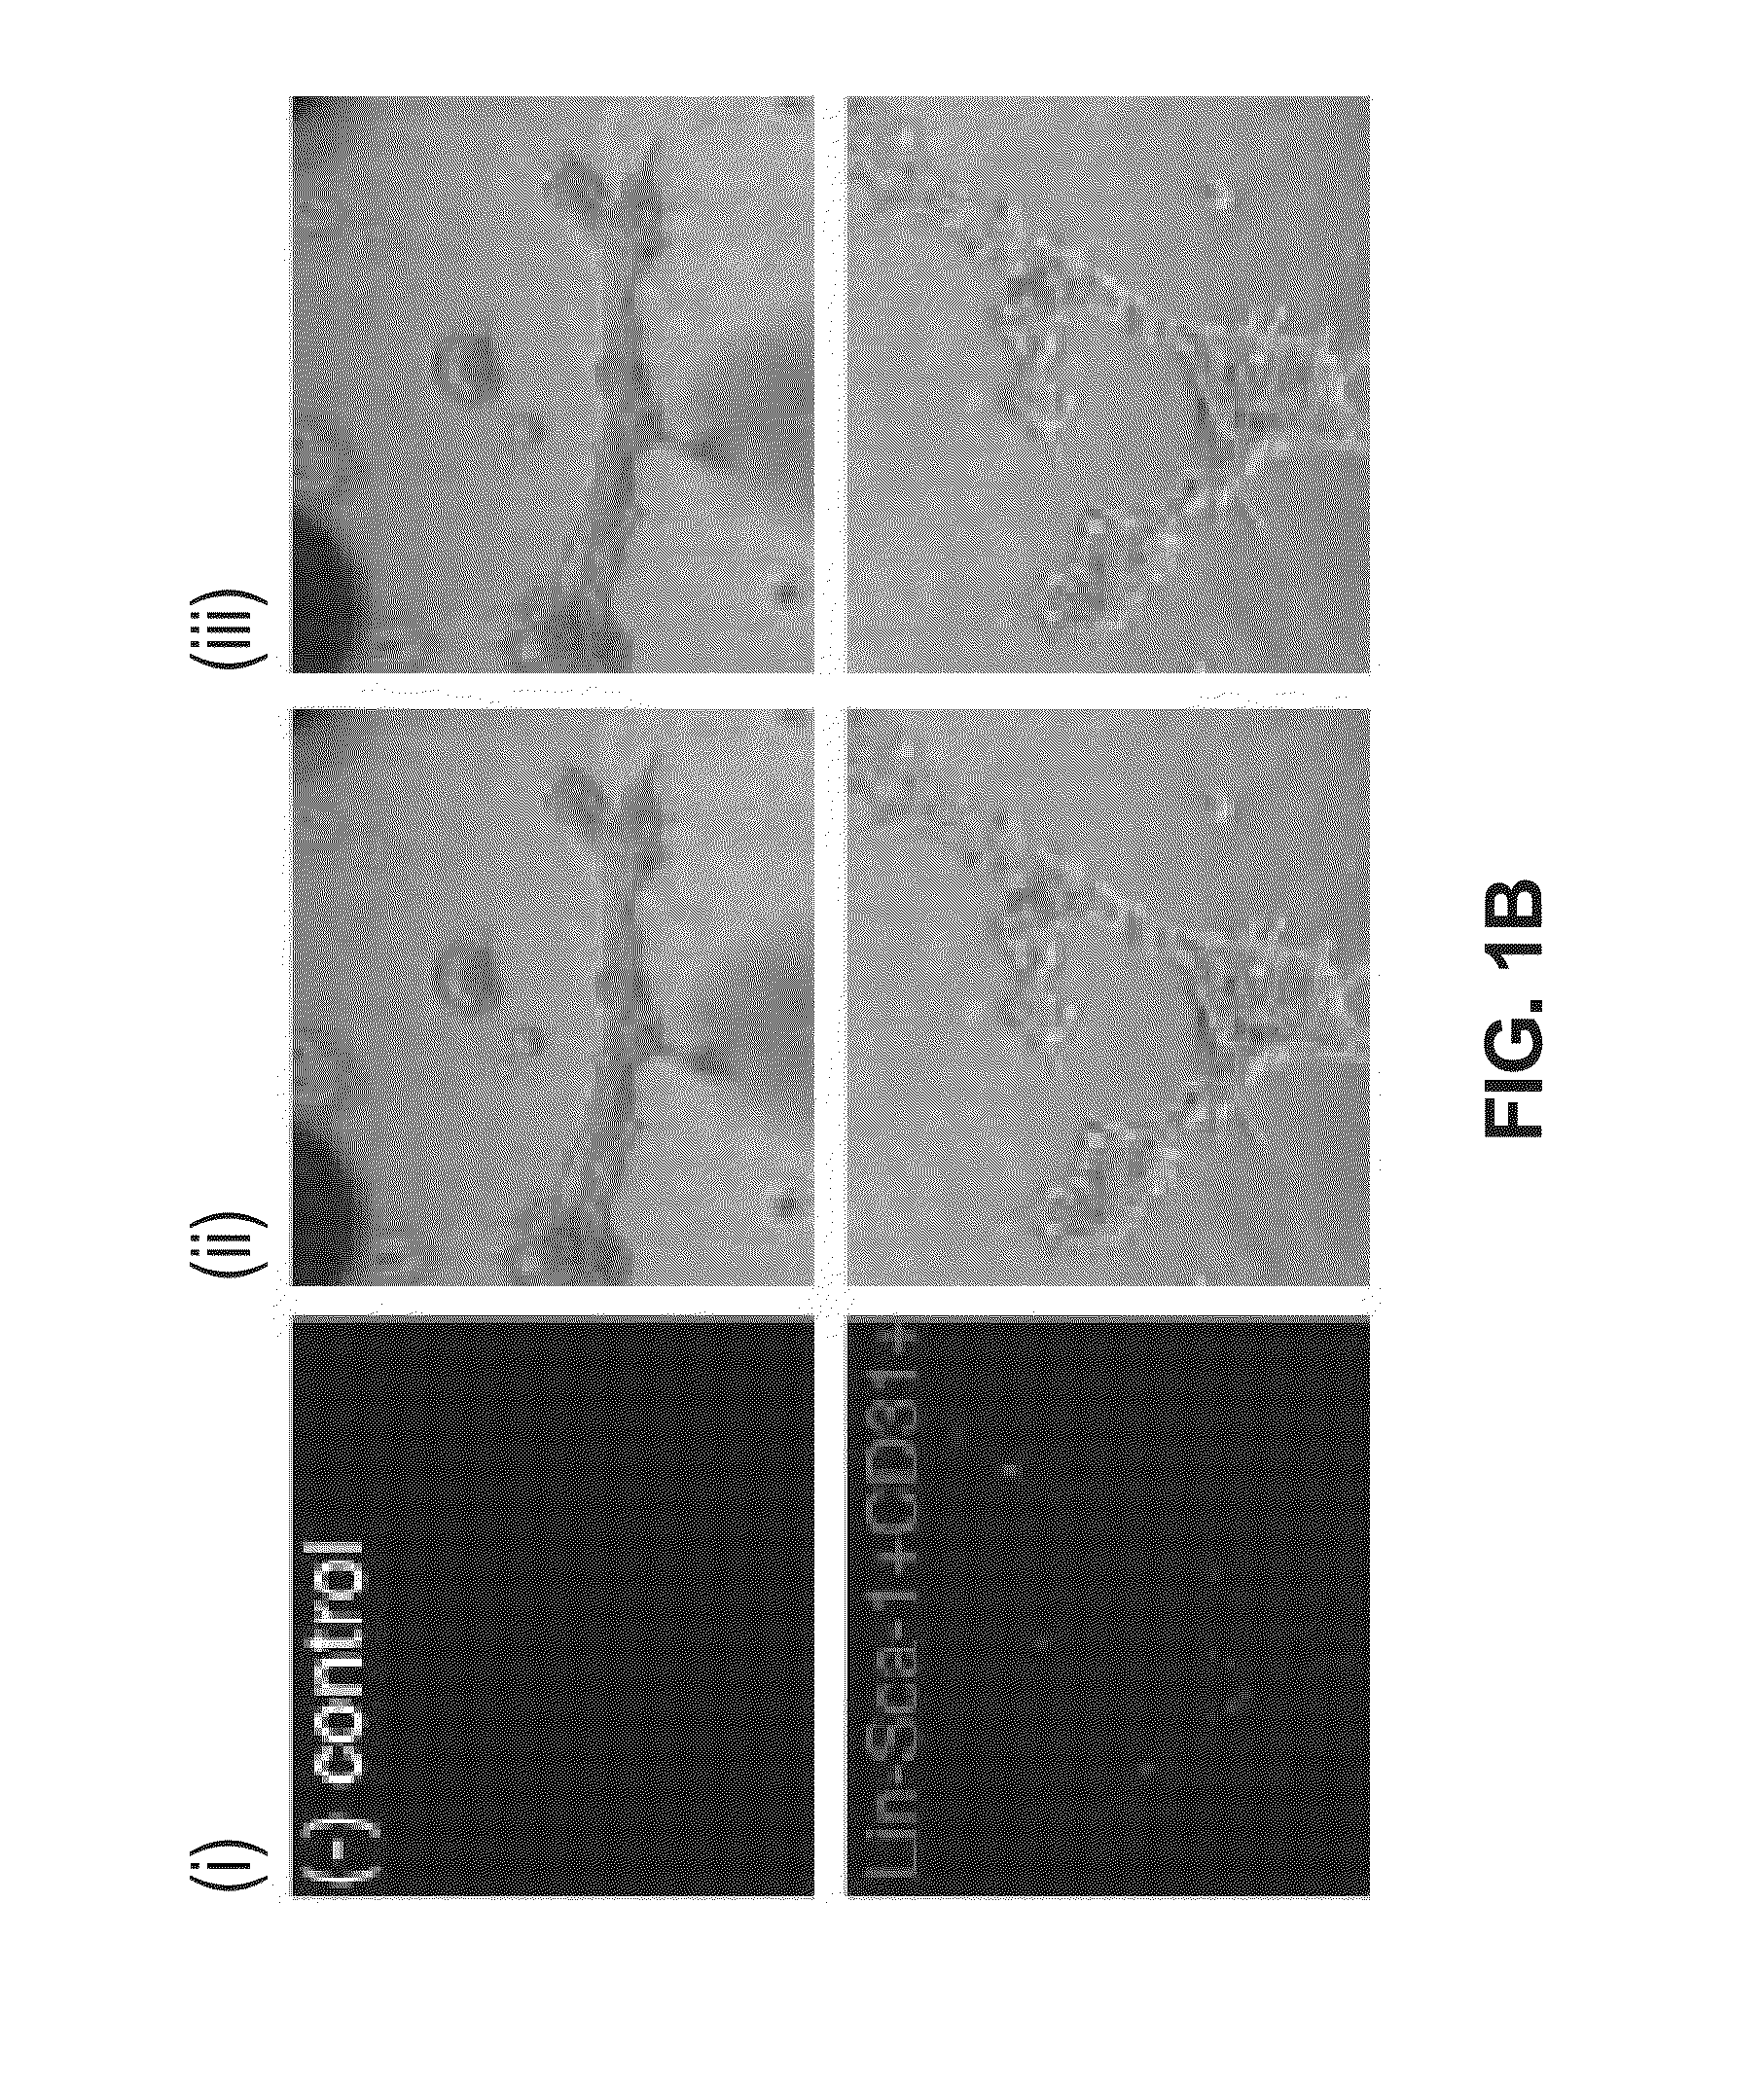 CD34+ cells and methods of use